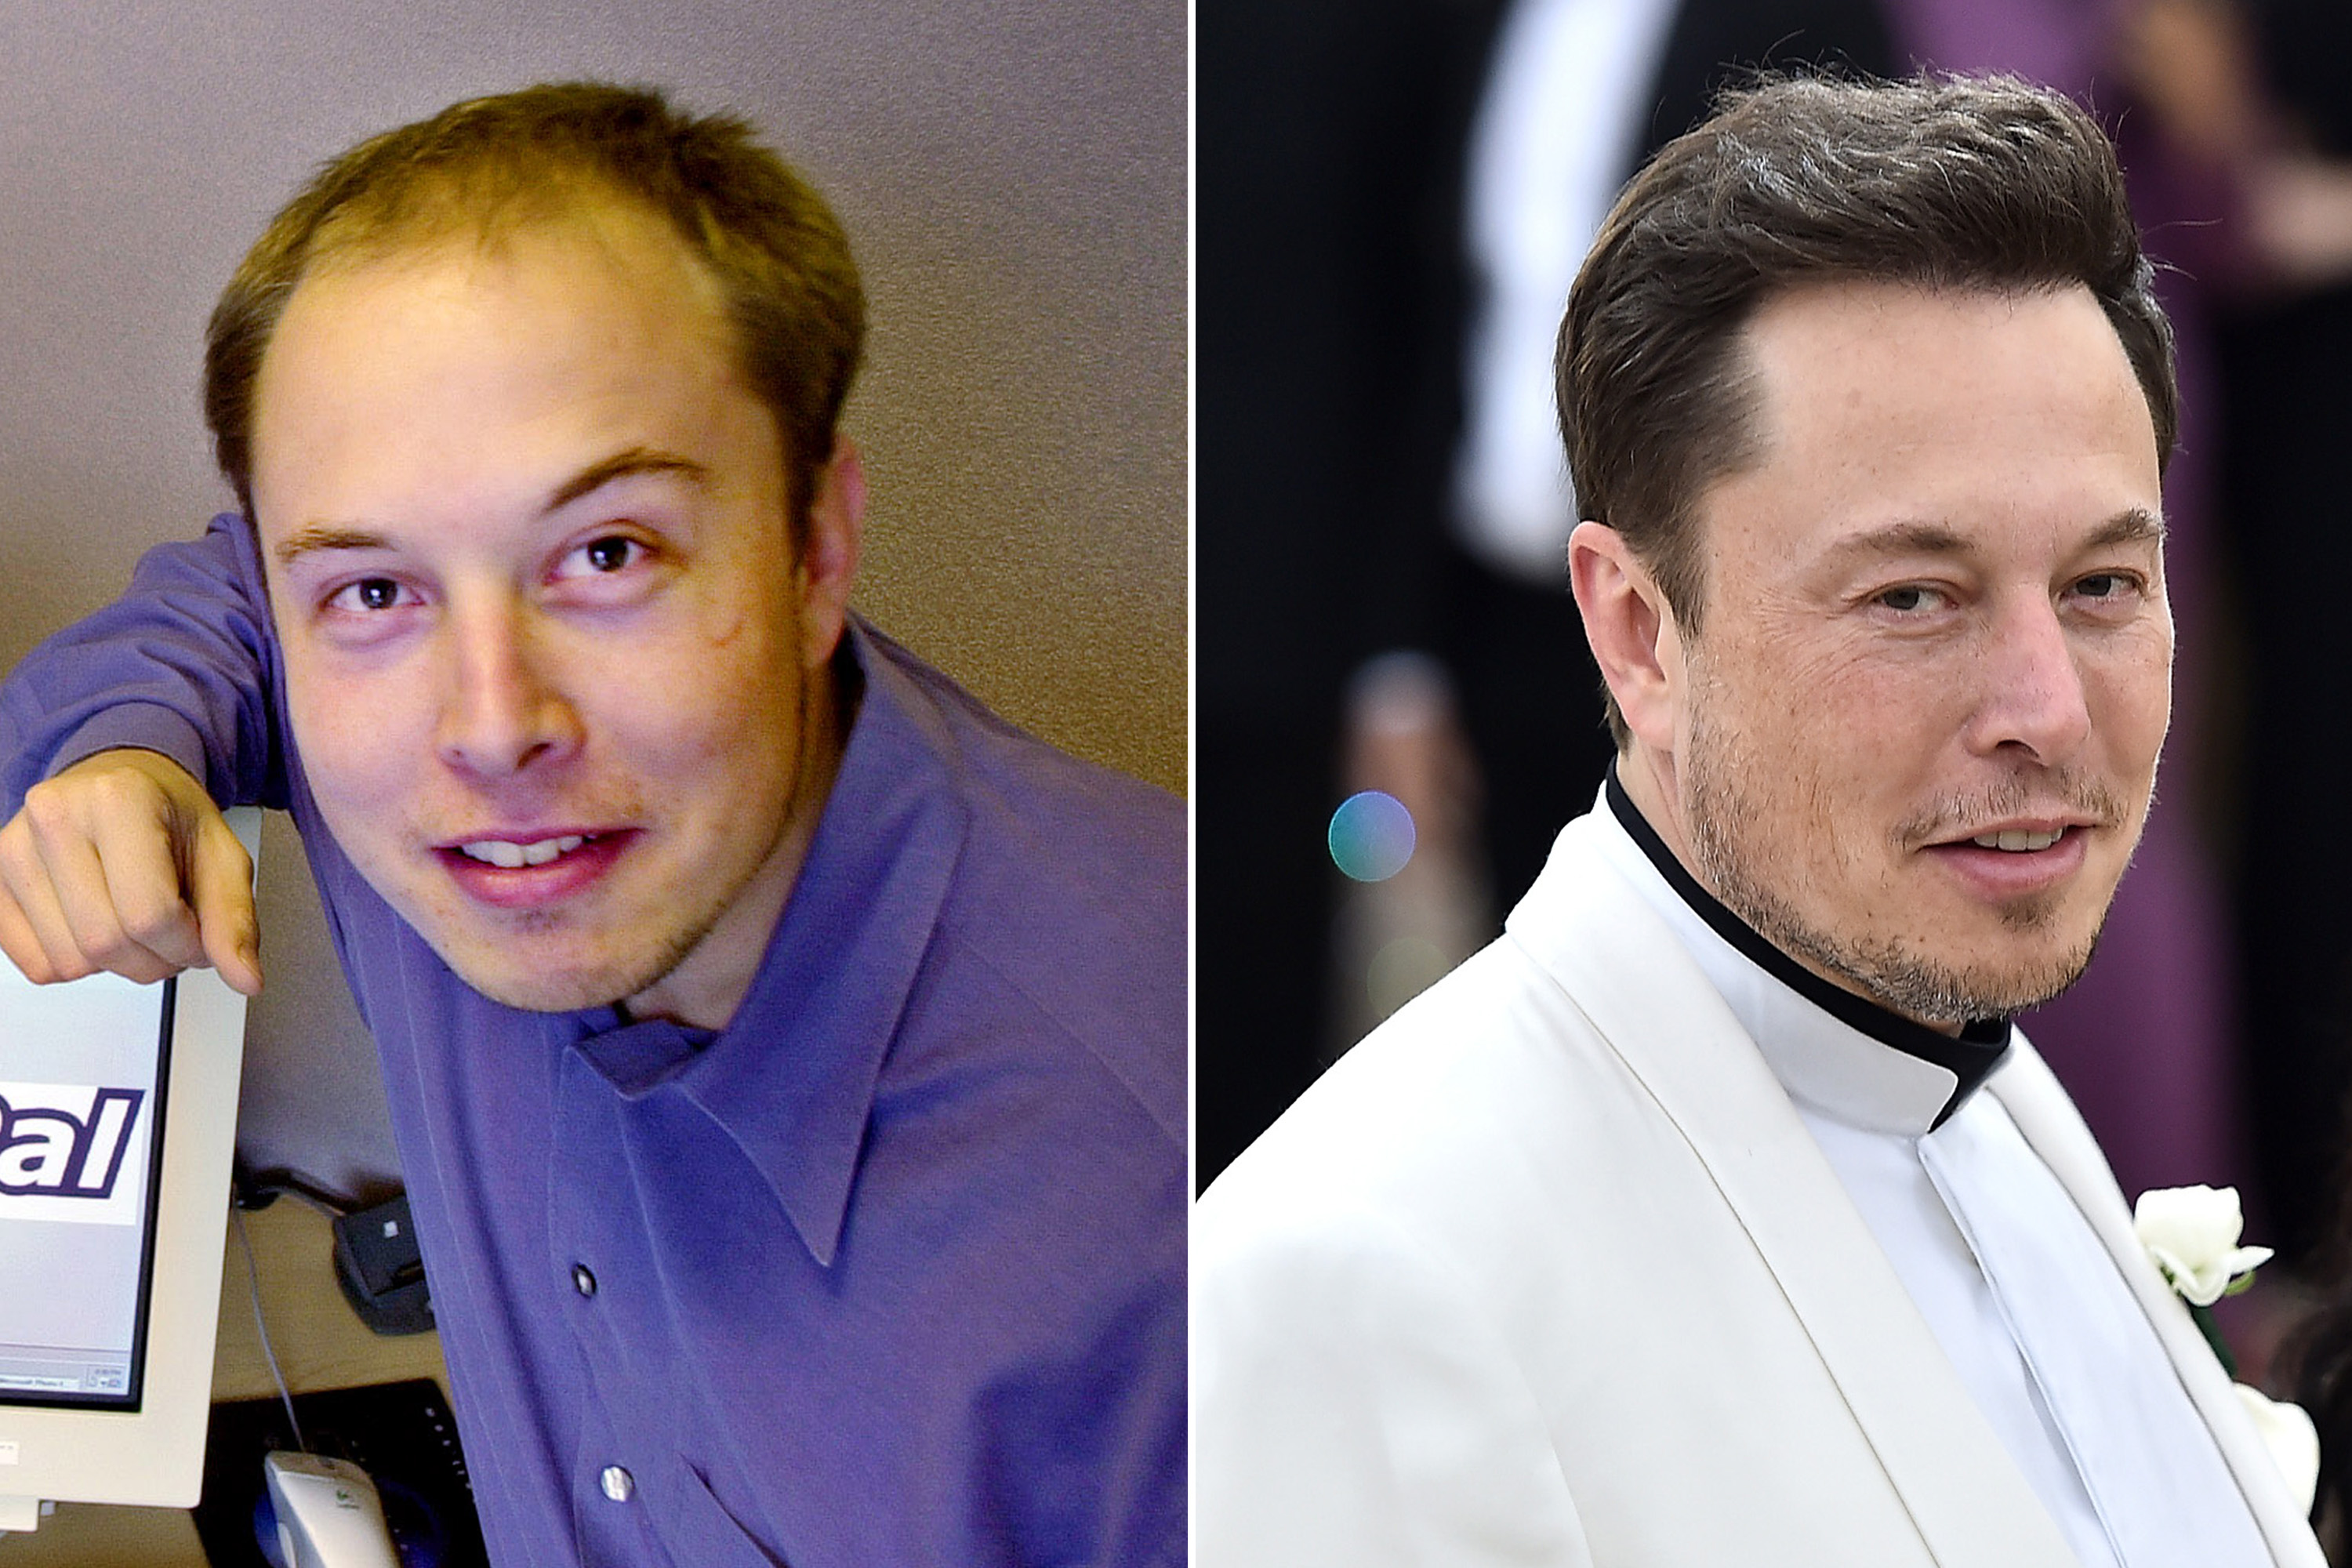 It's 'highly likely' Elon Musk spent over $20K on hair transplant surgery,  doctor says